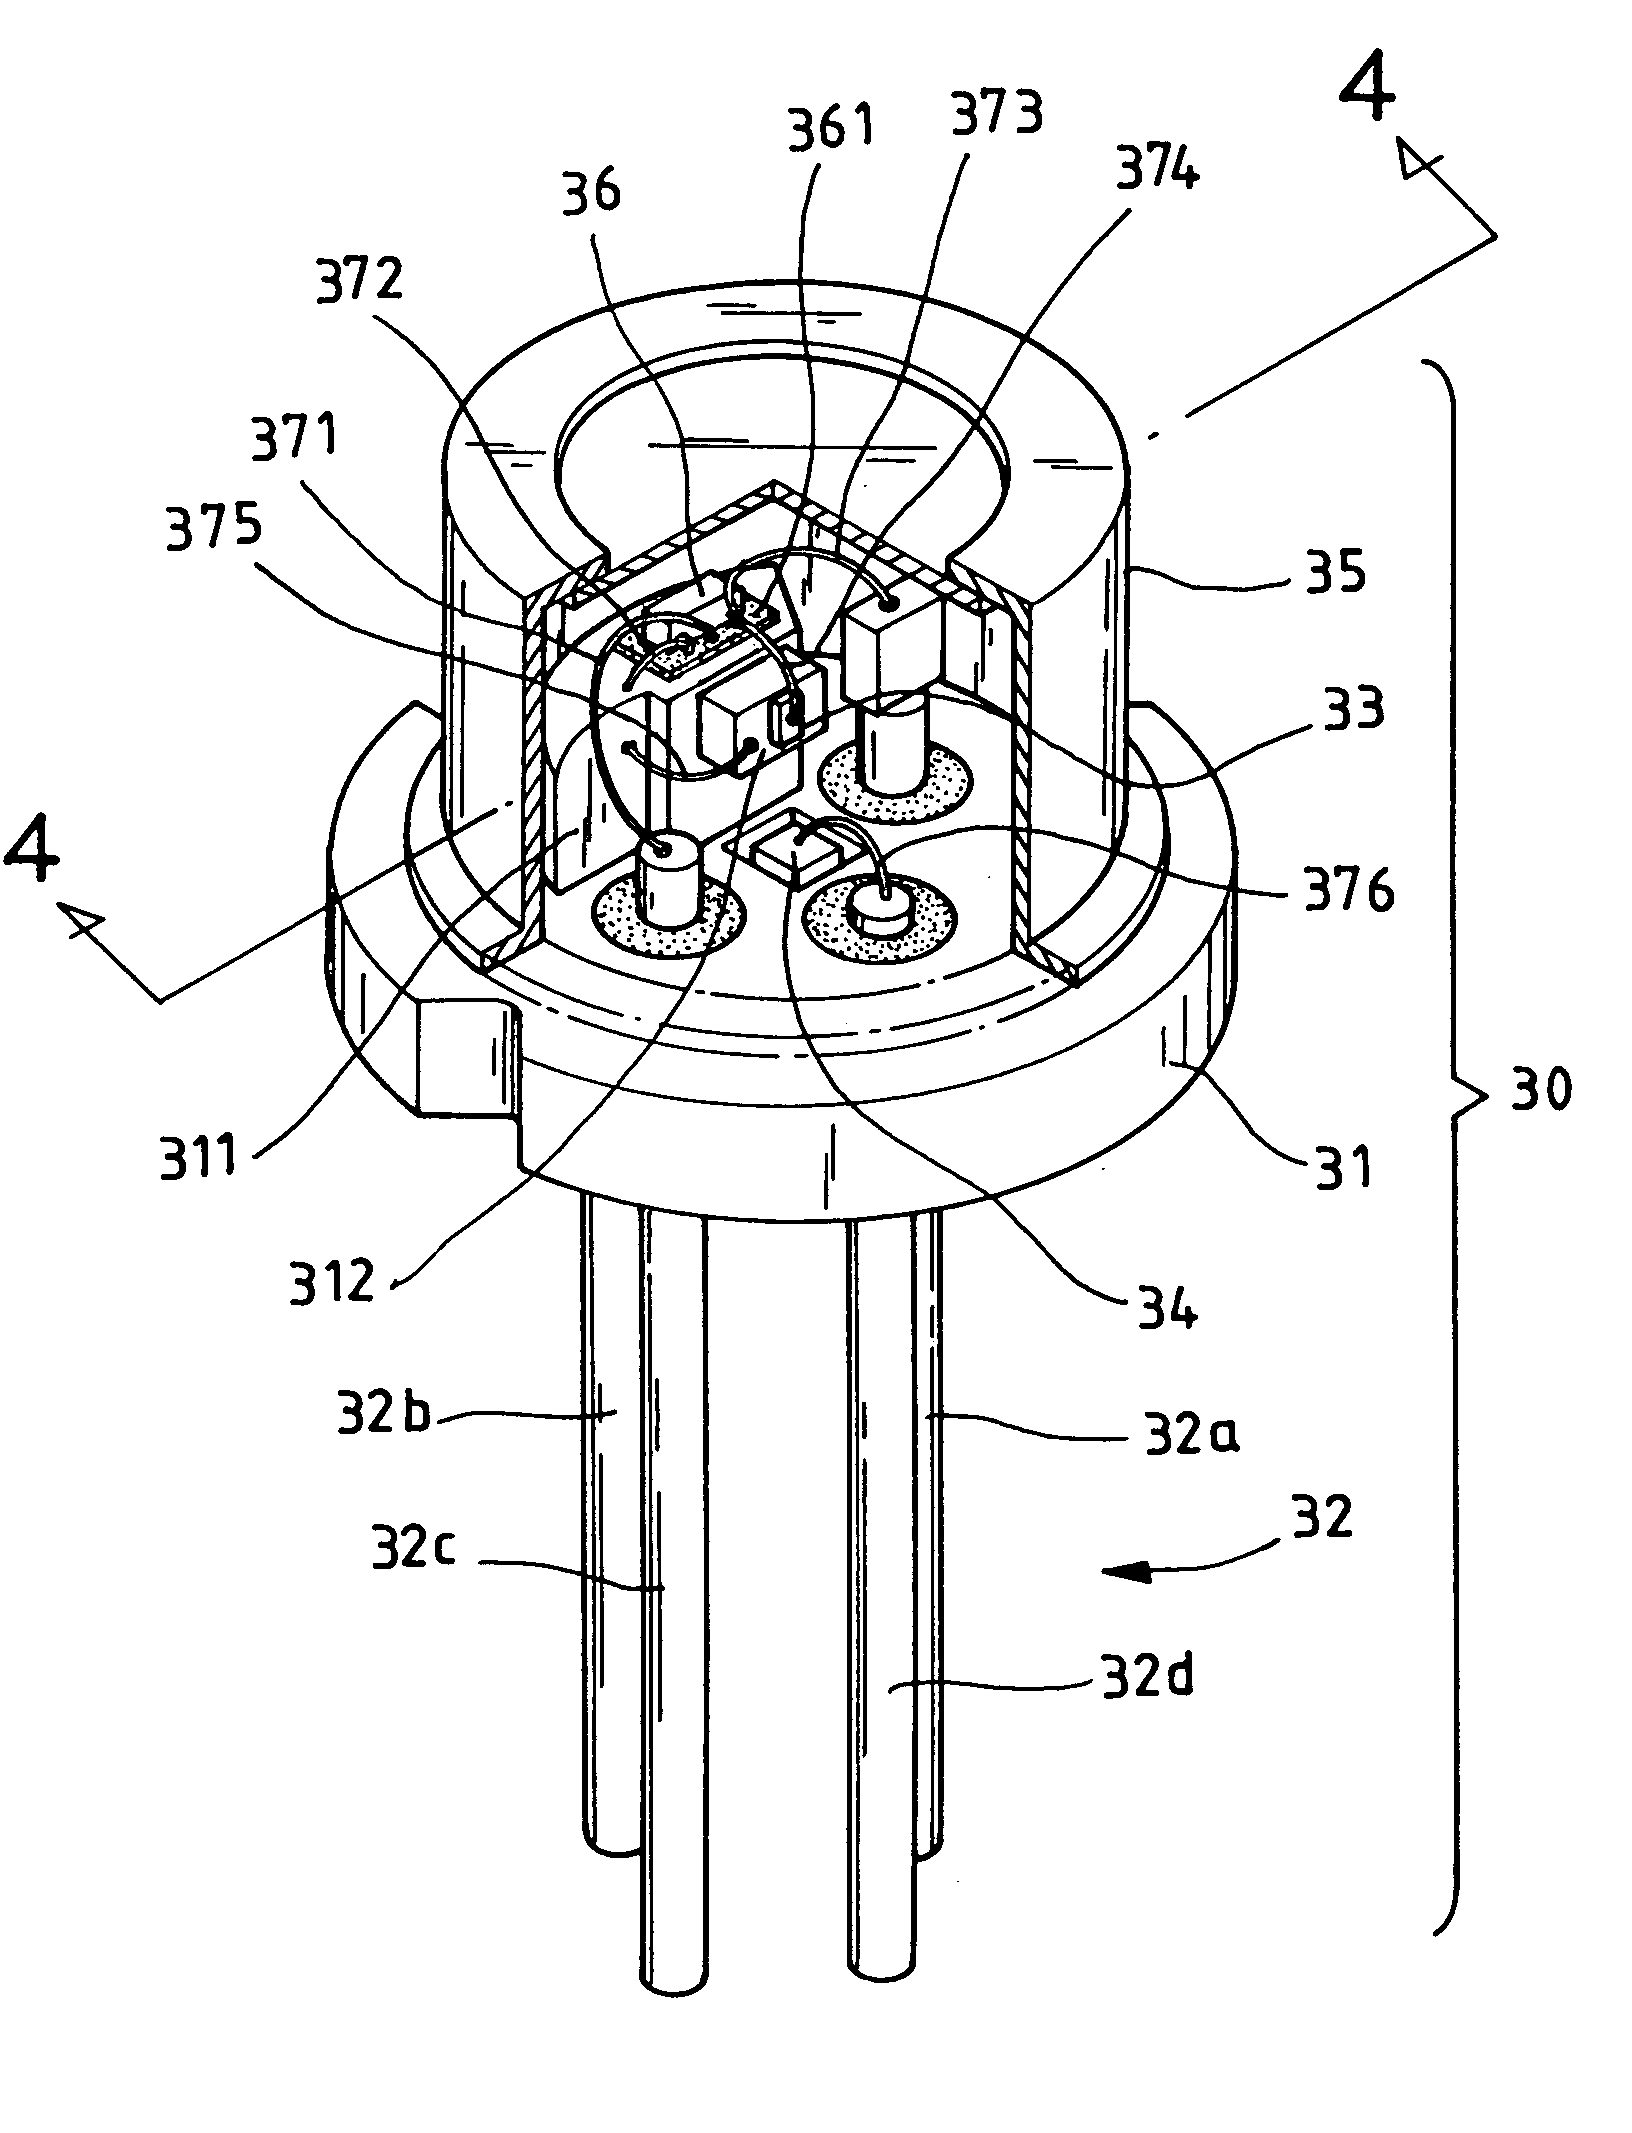 Laser diode module with a built-in high-frequency modulation IC